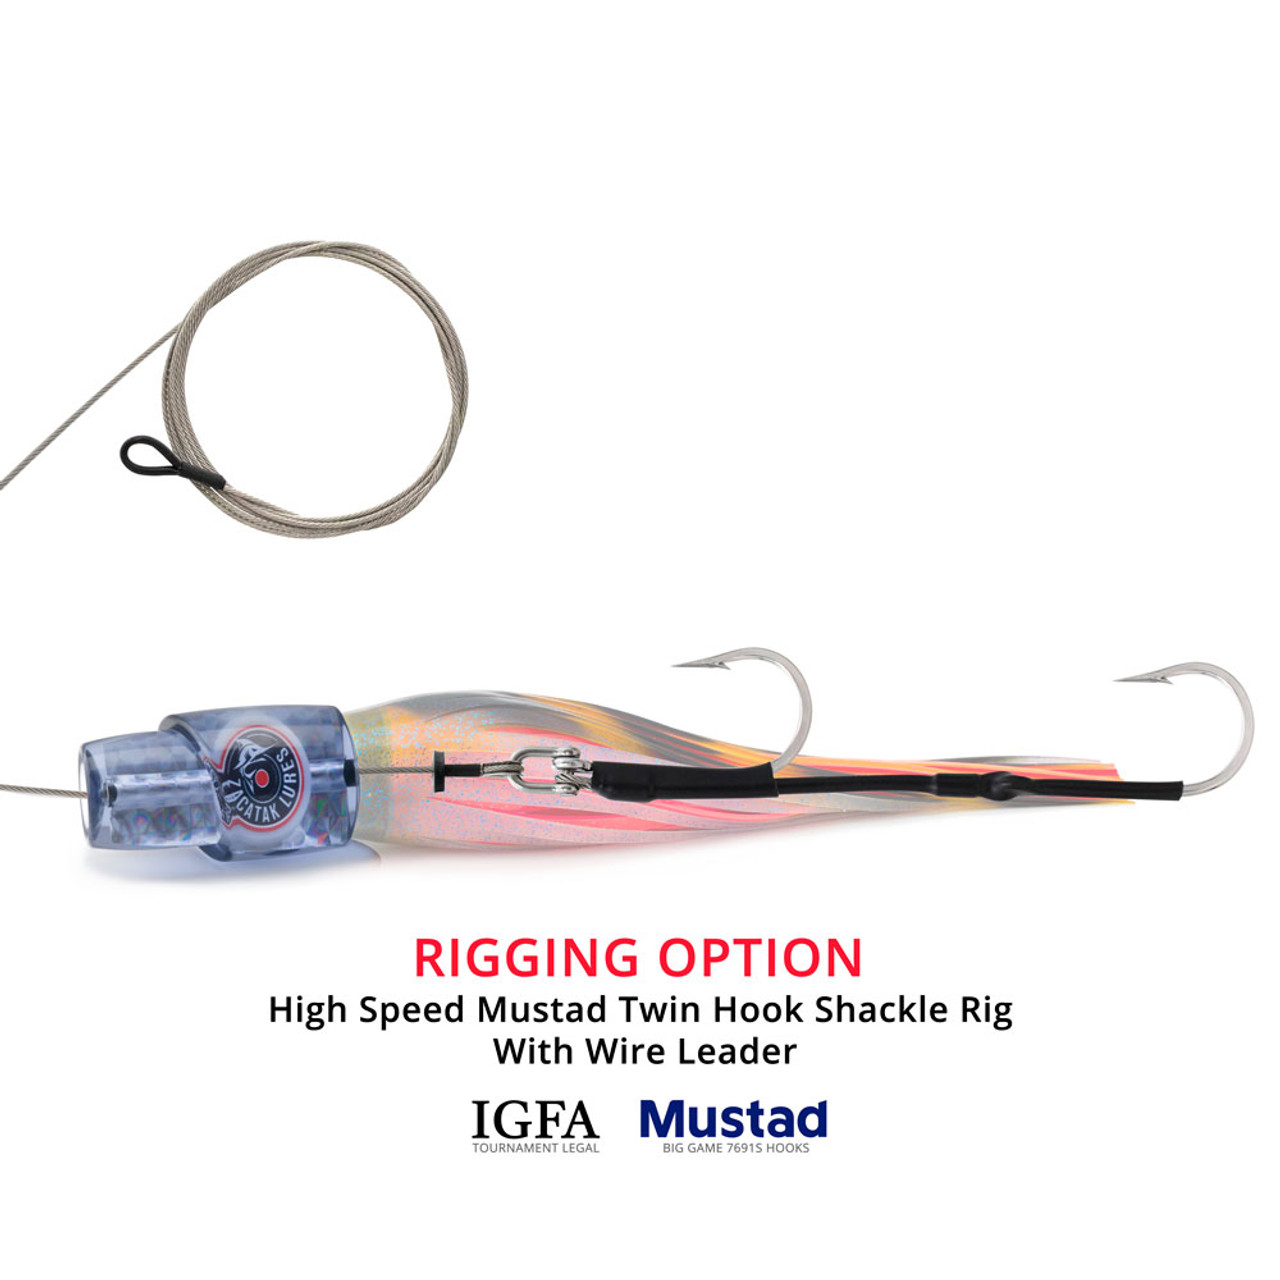 https://cdn11.bigcommerce.com/s-sv4r4mic/images/stencil/1280x1280/products/9223/50137/zacatak-lures-high-speed-rigging-option-twin-hook-shackle-rig-thunderstruck__68253.1671434063.jpg?c=2?imbypass=on